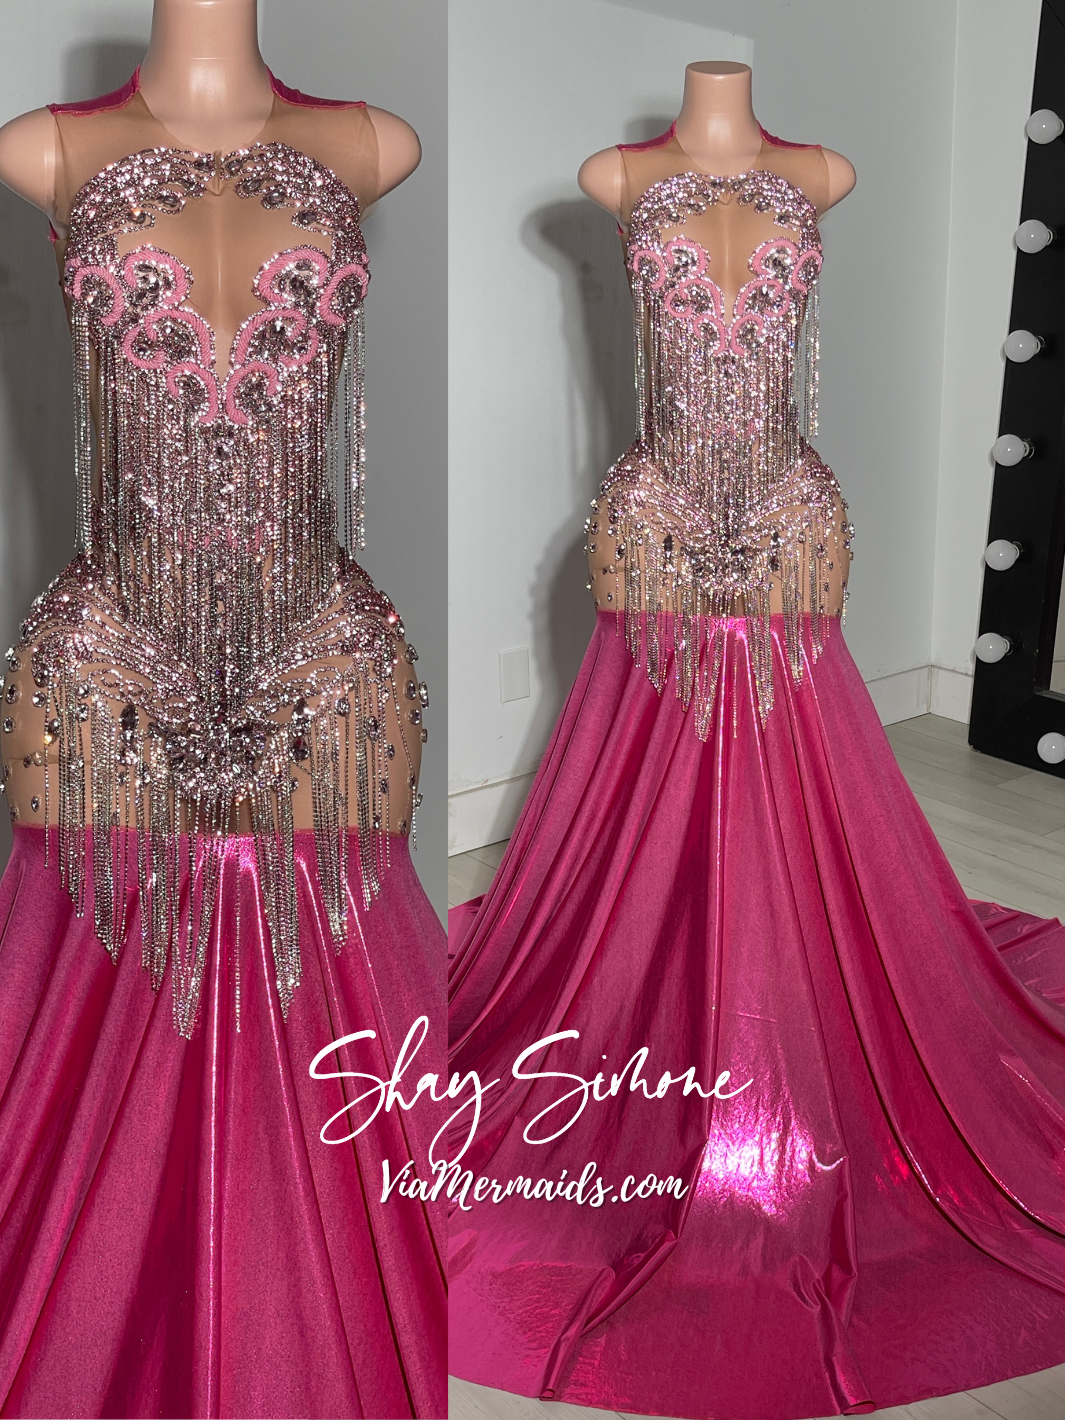 PINK IT GIRL 4.0 FRINGE EVENING GOWN! SHIPMENT DATE: 03/25